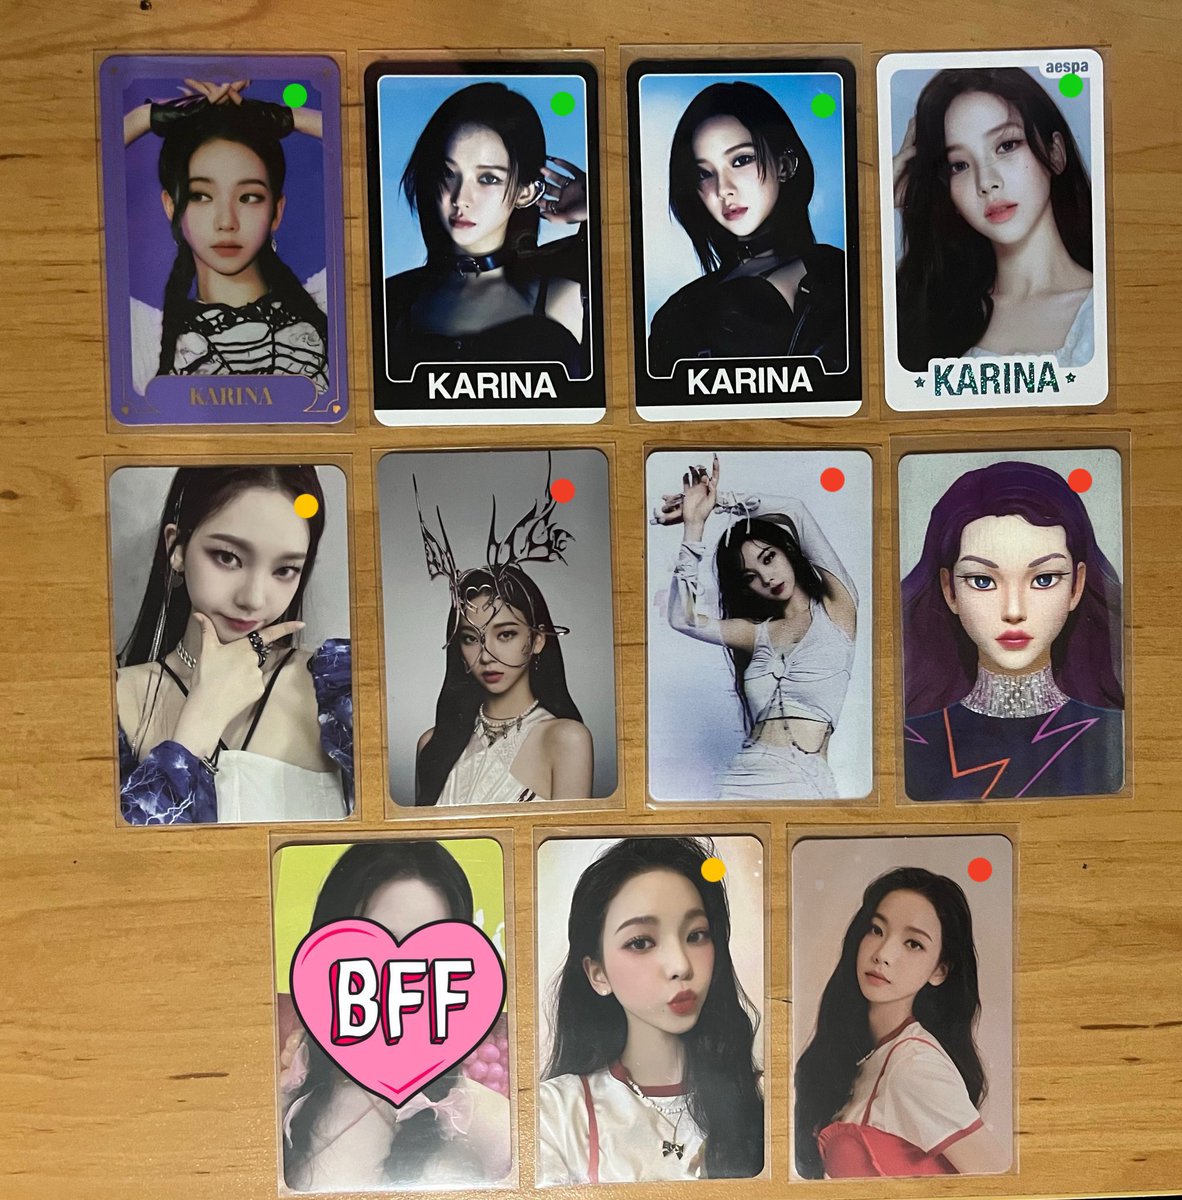 wts lfb

karina pcs

— breadrina with ratio (1:3💚, 1:2❤️, 1:1💛)
— prices on alt
— mop: gcash, mod: flash / ggx, loc: navotas 
— expect slow replies (busy)
— all onhand 
— will prio taking more

# aespa smcu express my world oh candy pocket sg23 sg22 trading card savage drama